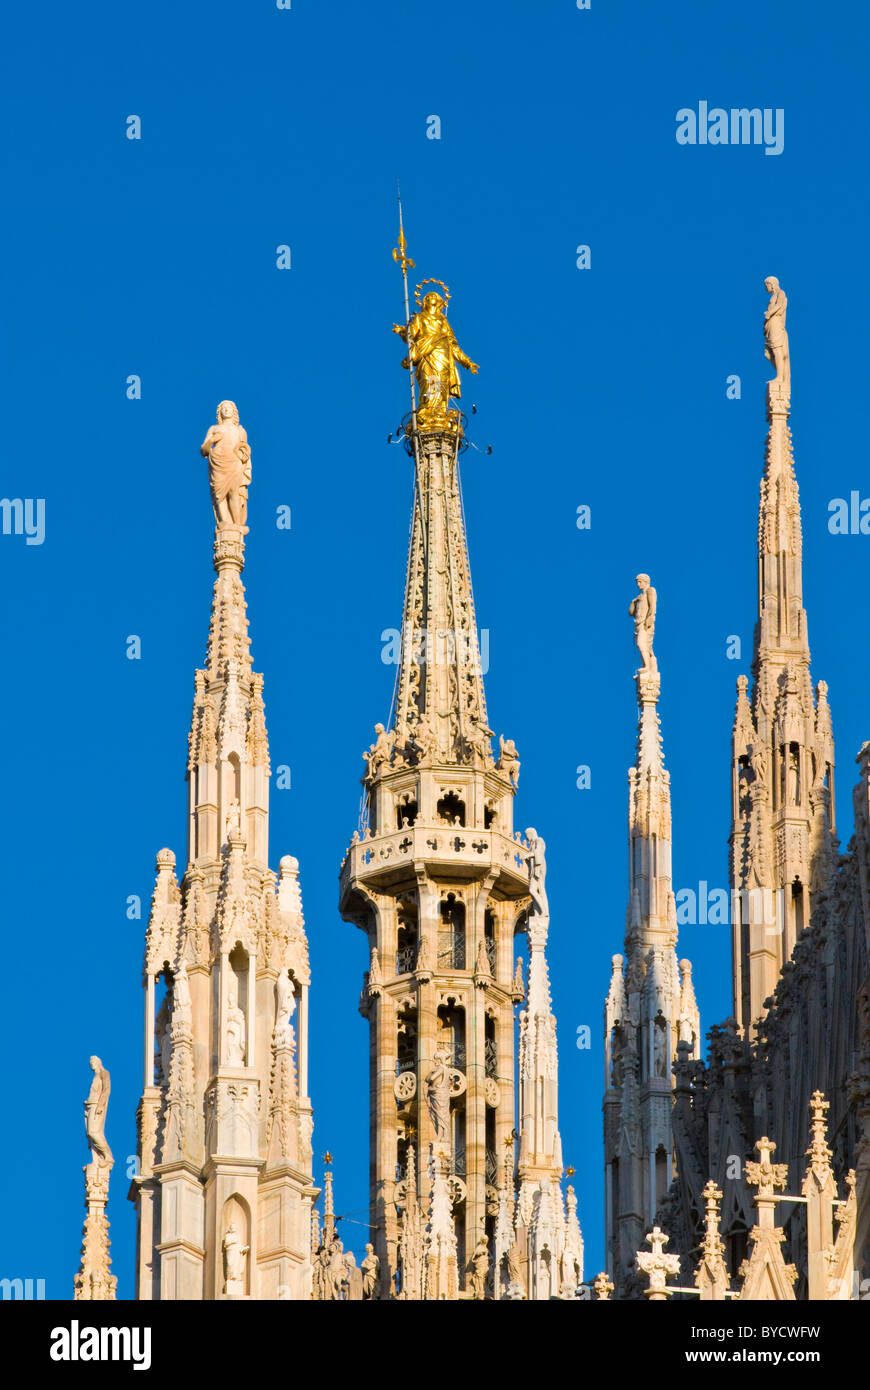 Italy, Milan, Madonnina statue on cathedral spire against blue sky Stock Photo